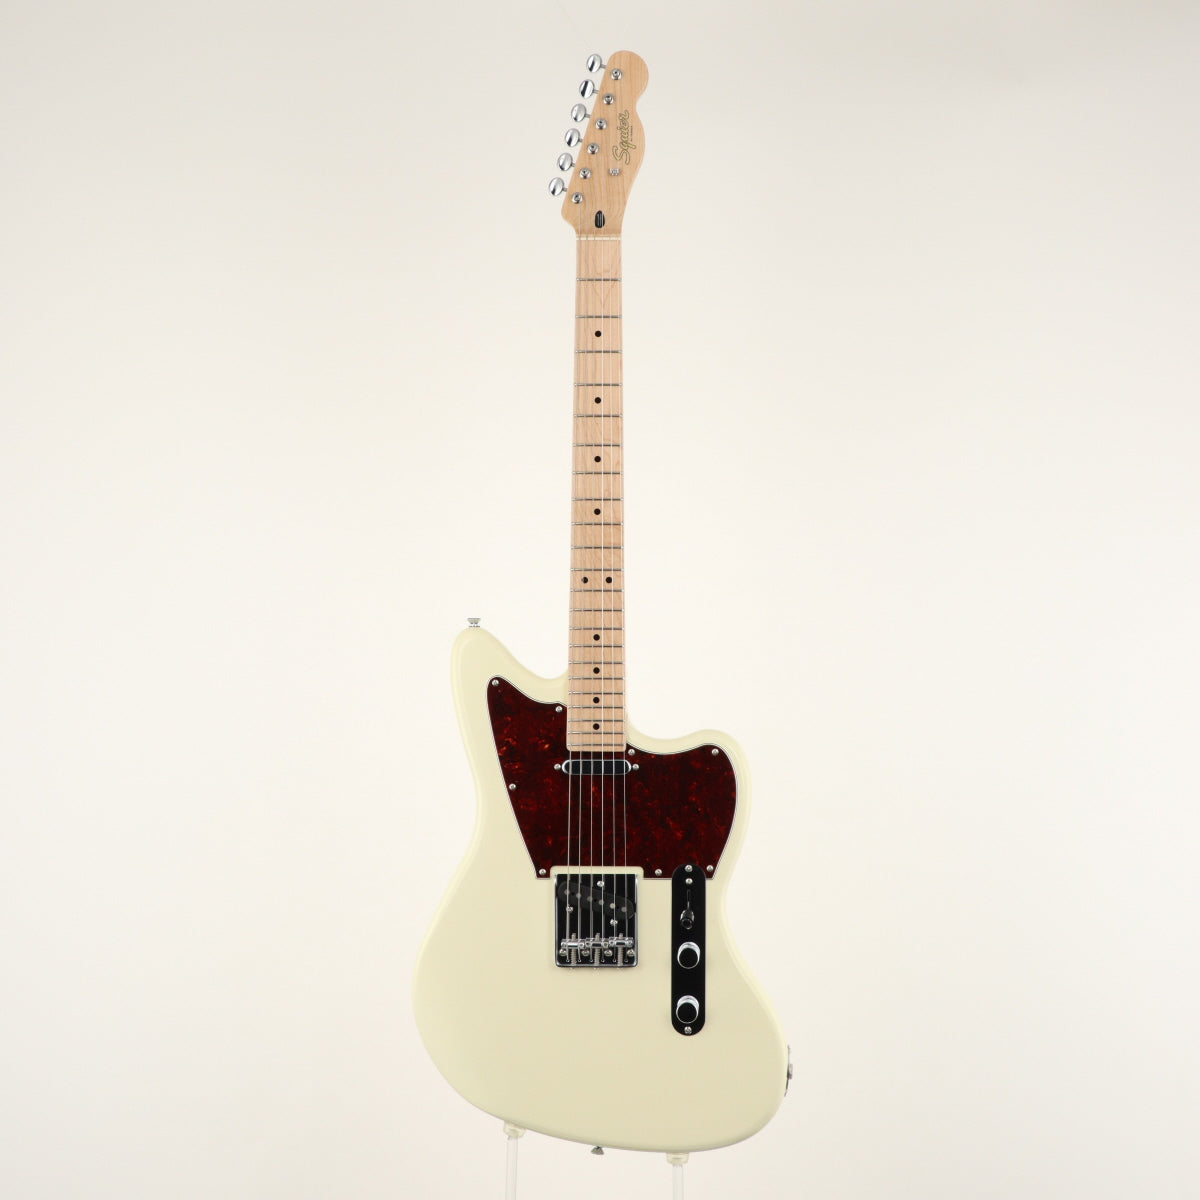 [SN CYKE21006800] USED Squier / Paranormal Offset Telecaster Olympic White [11]